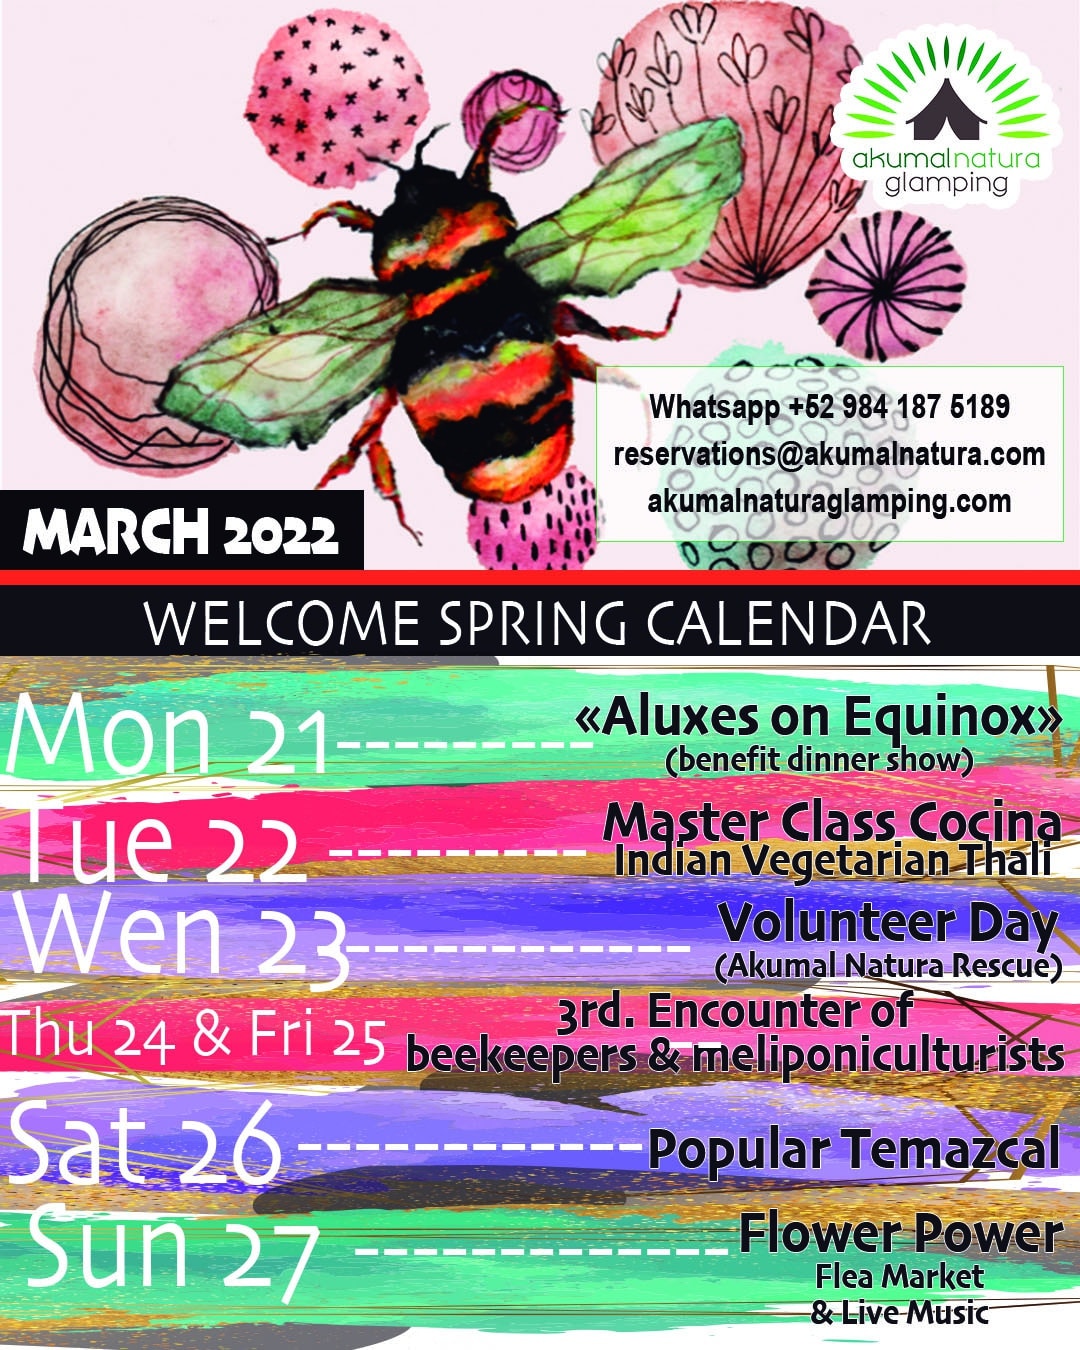 Welcome Spring 2022